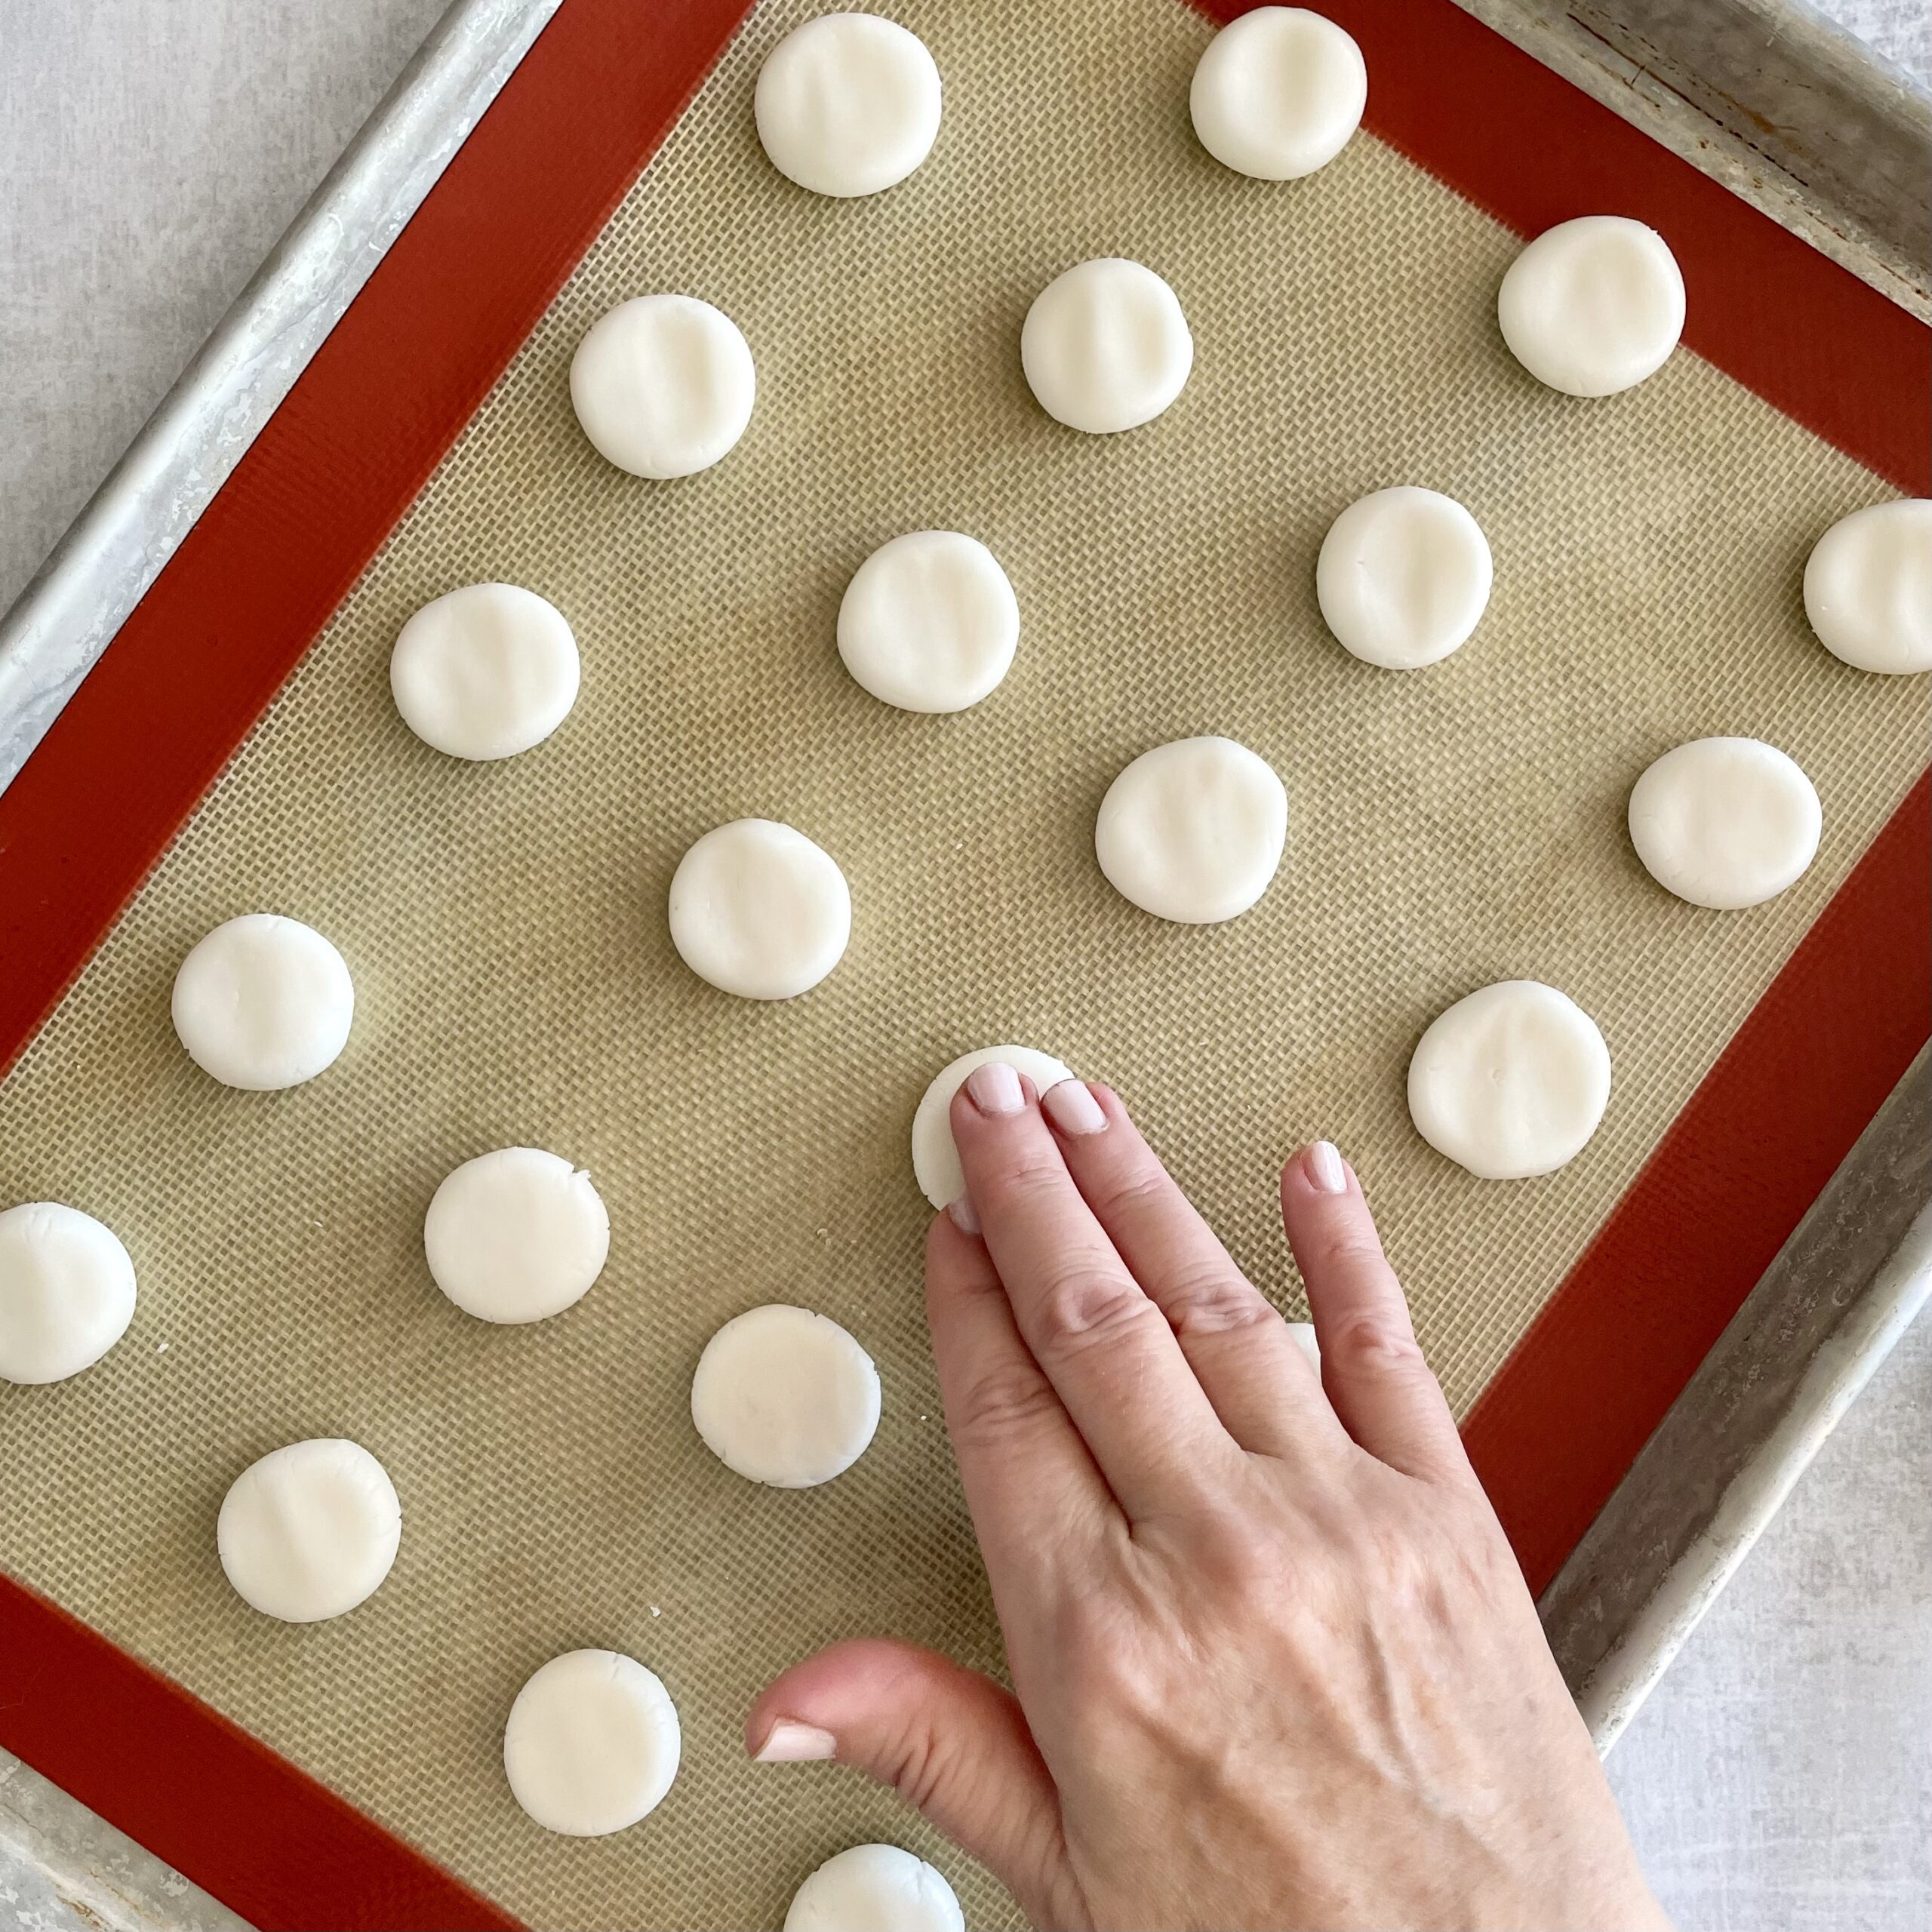 patting white cream filling balls into disks on a silpat lined baking sheet for making dark chocolate mint cream candies